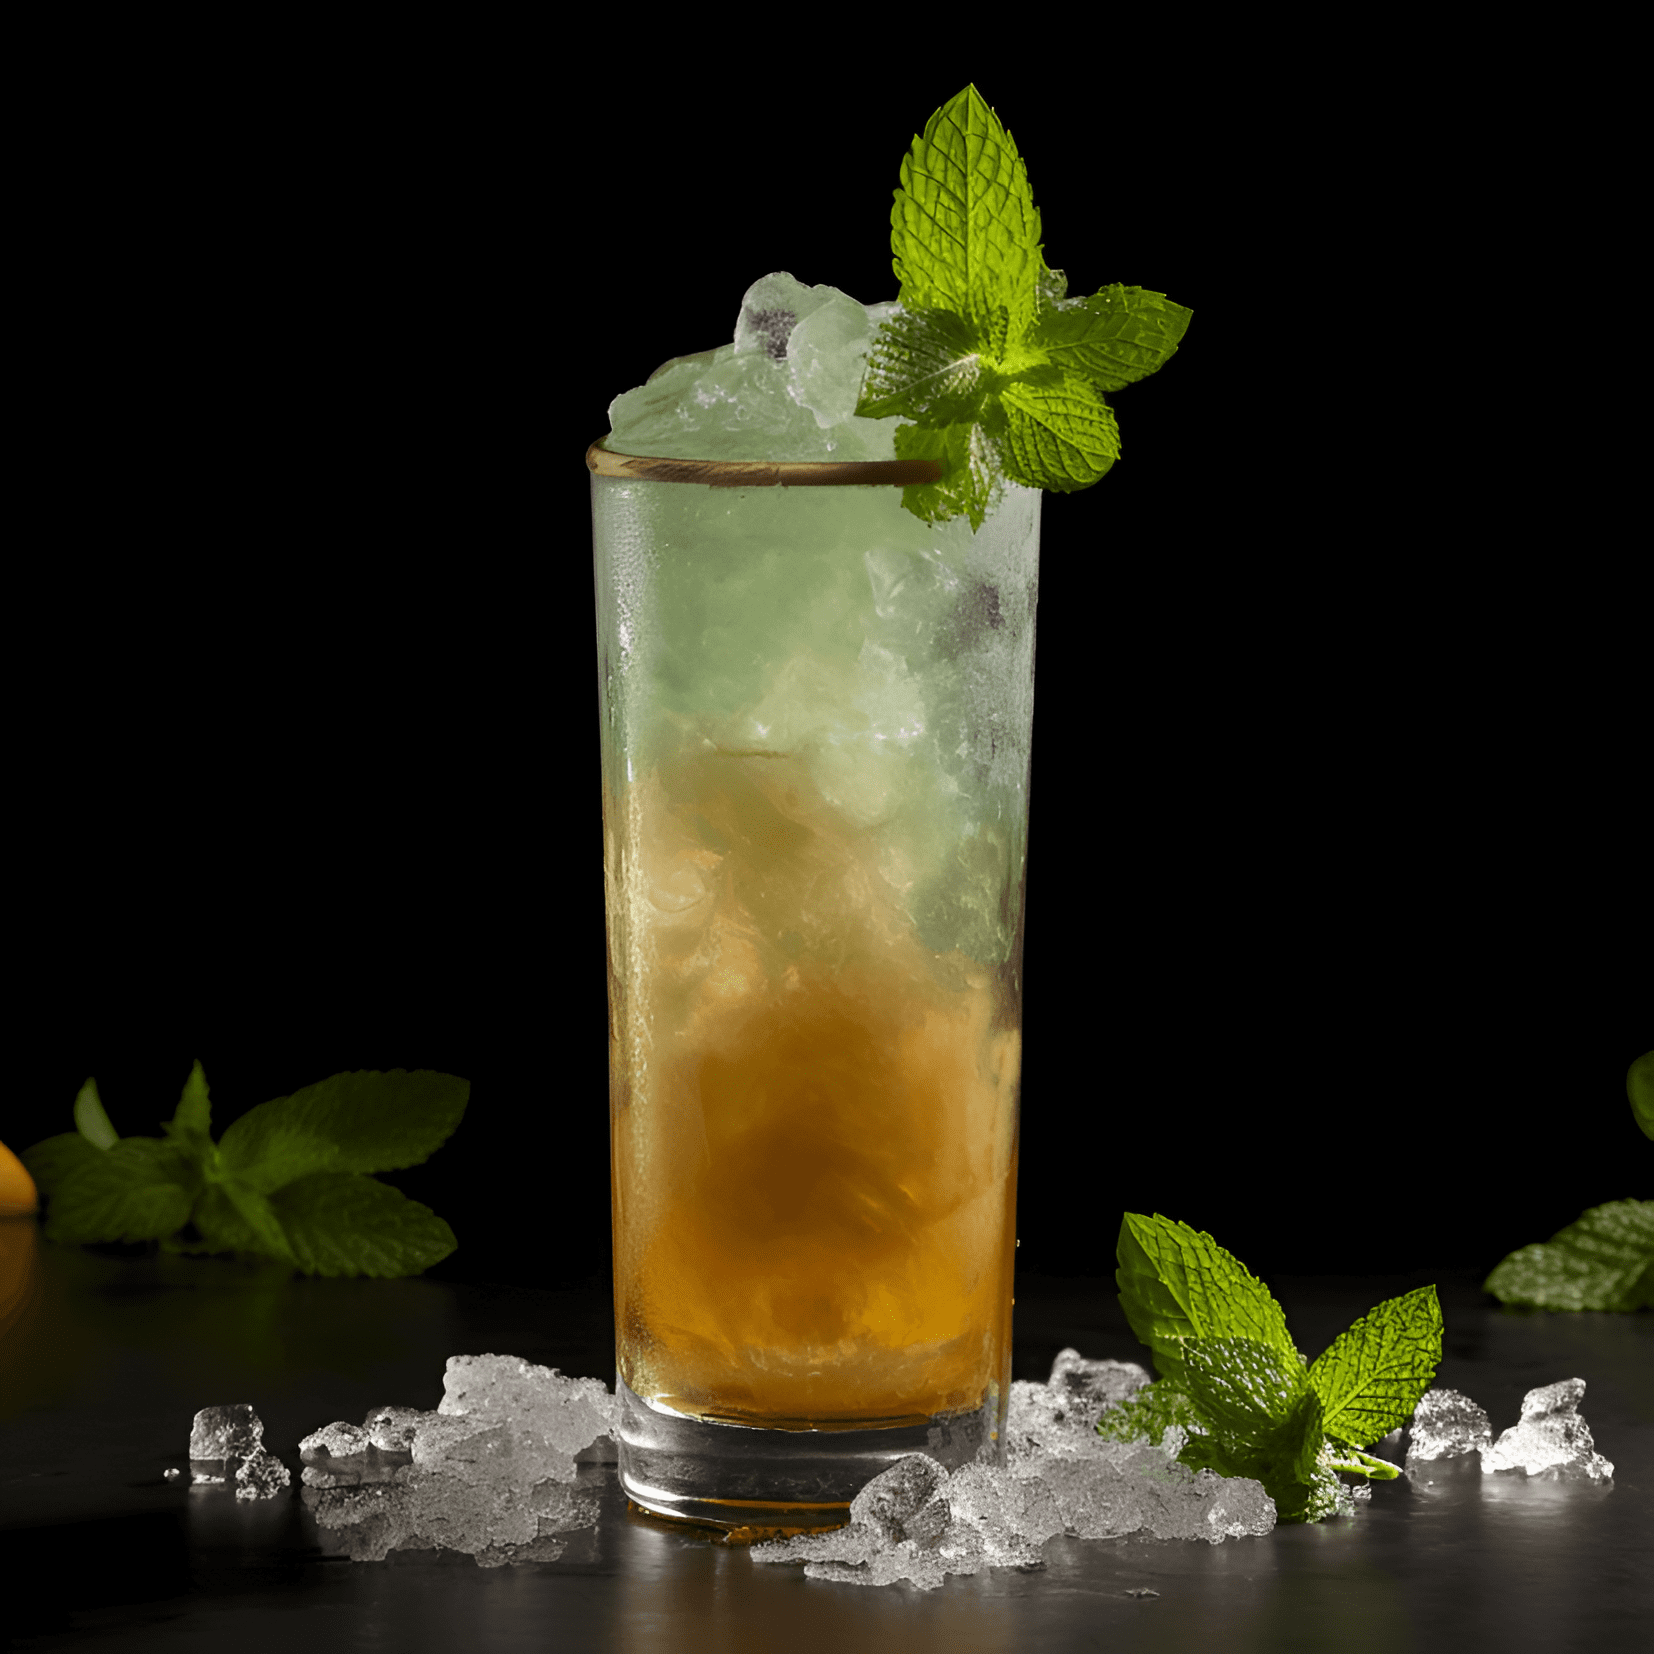 Swizzle Cocktail Recipe - The Swizzle cocktail is a refreshing, fruity, and slightly sweet drink with a hint of spice. It has a balanced combination of sour, sweet, and bitter flavors, with a smooth, velvety texture.